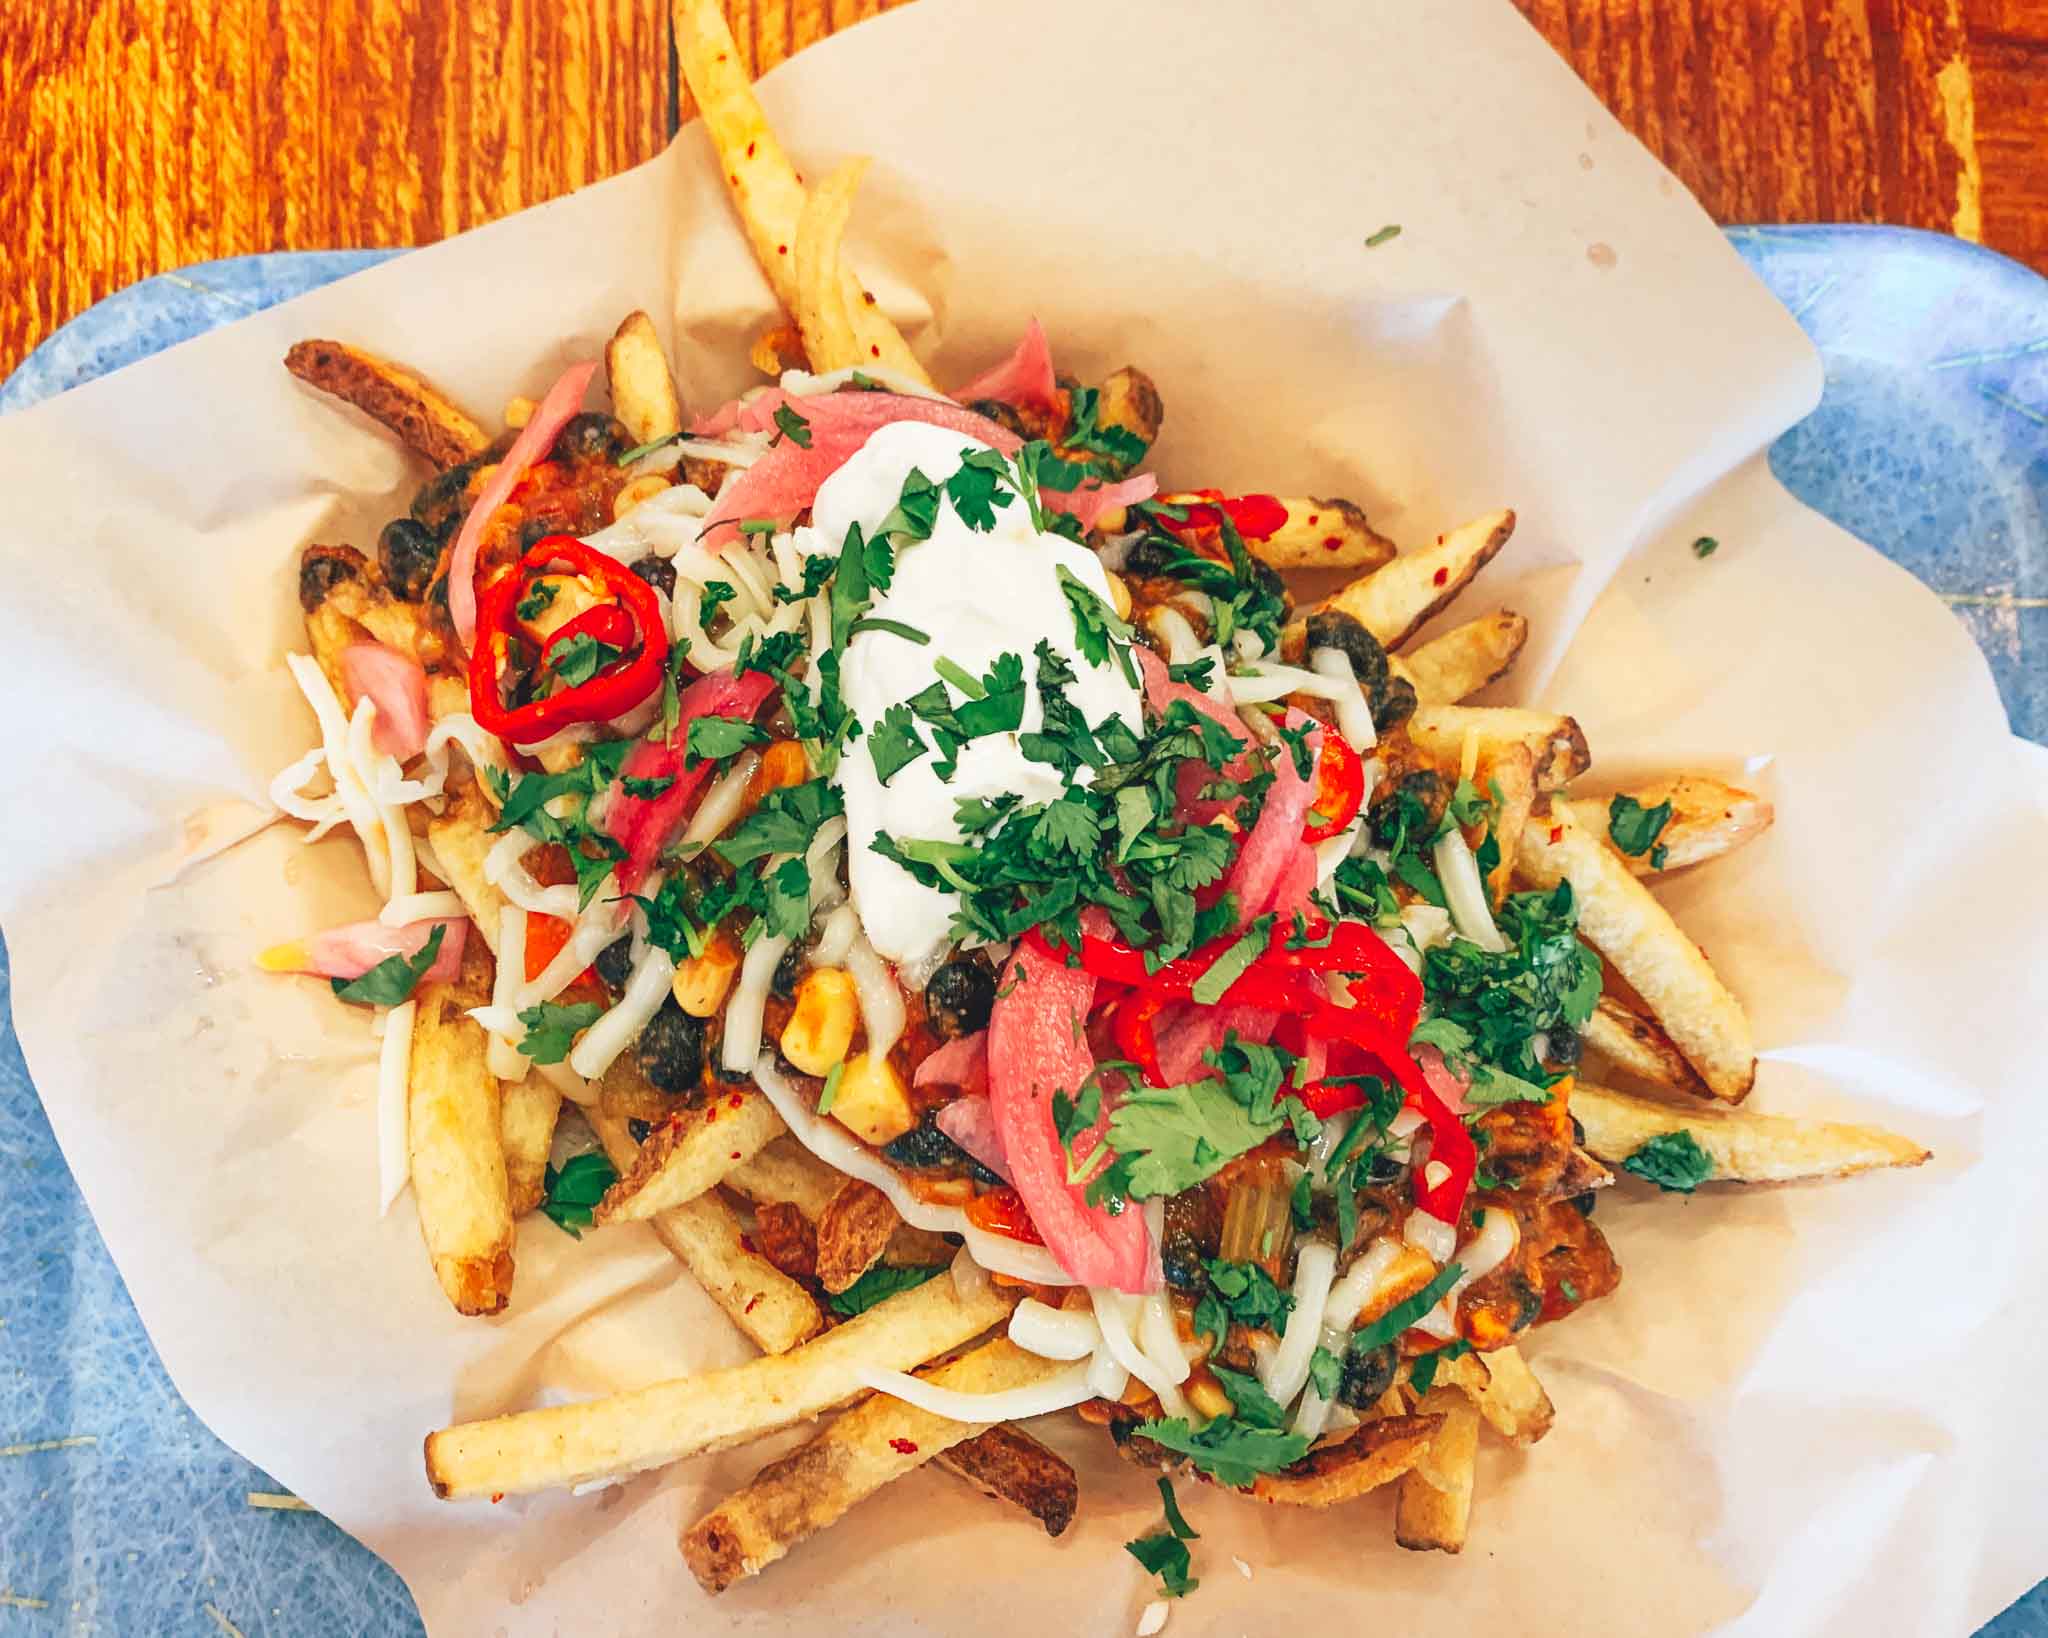 french fries topped with sour cream, onions, chives, and chili